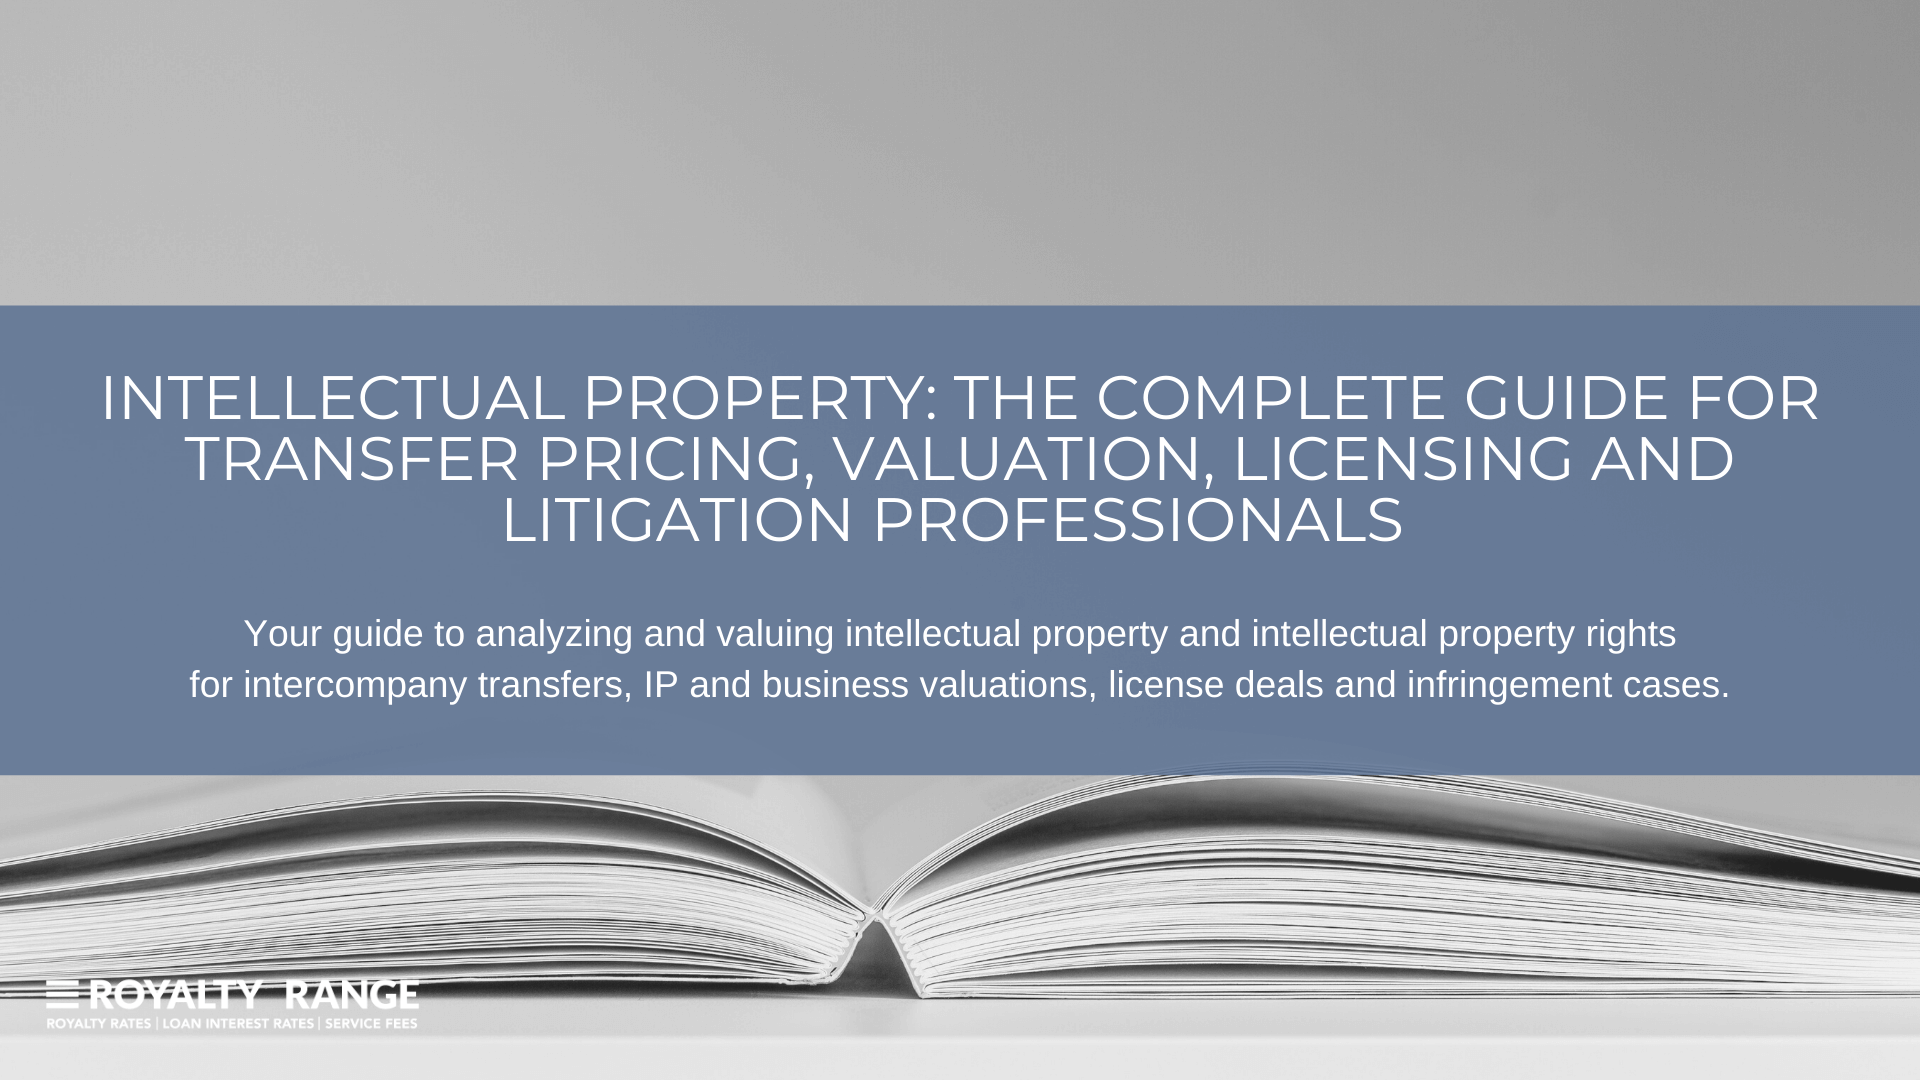 Intellectual Property_ The complete guide for transfer pricing, valuation, licensing and litigation professionals